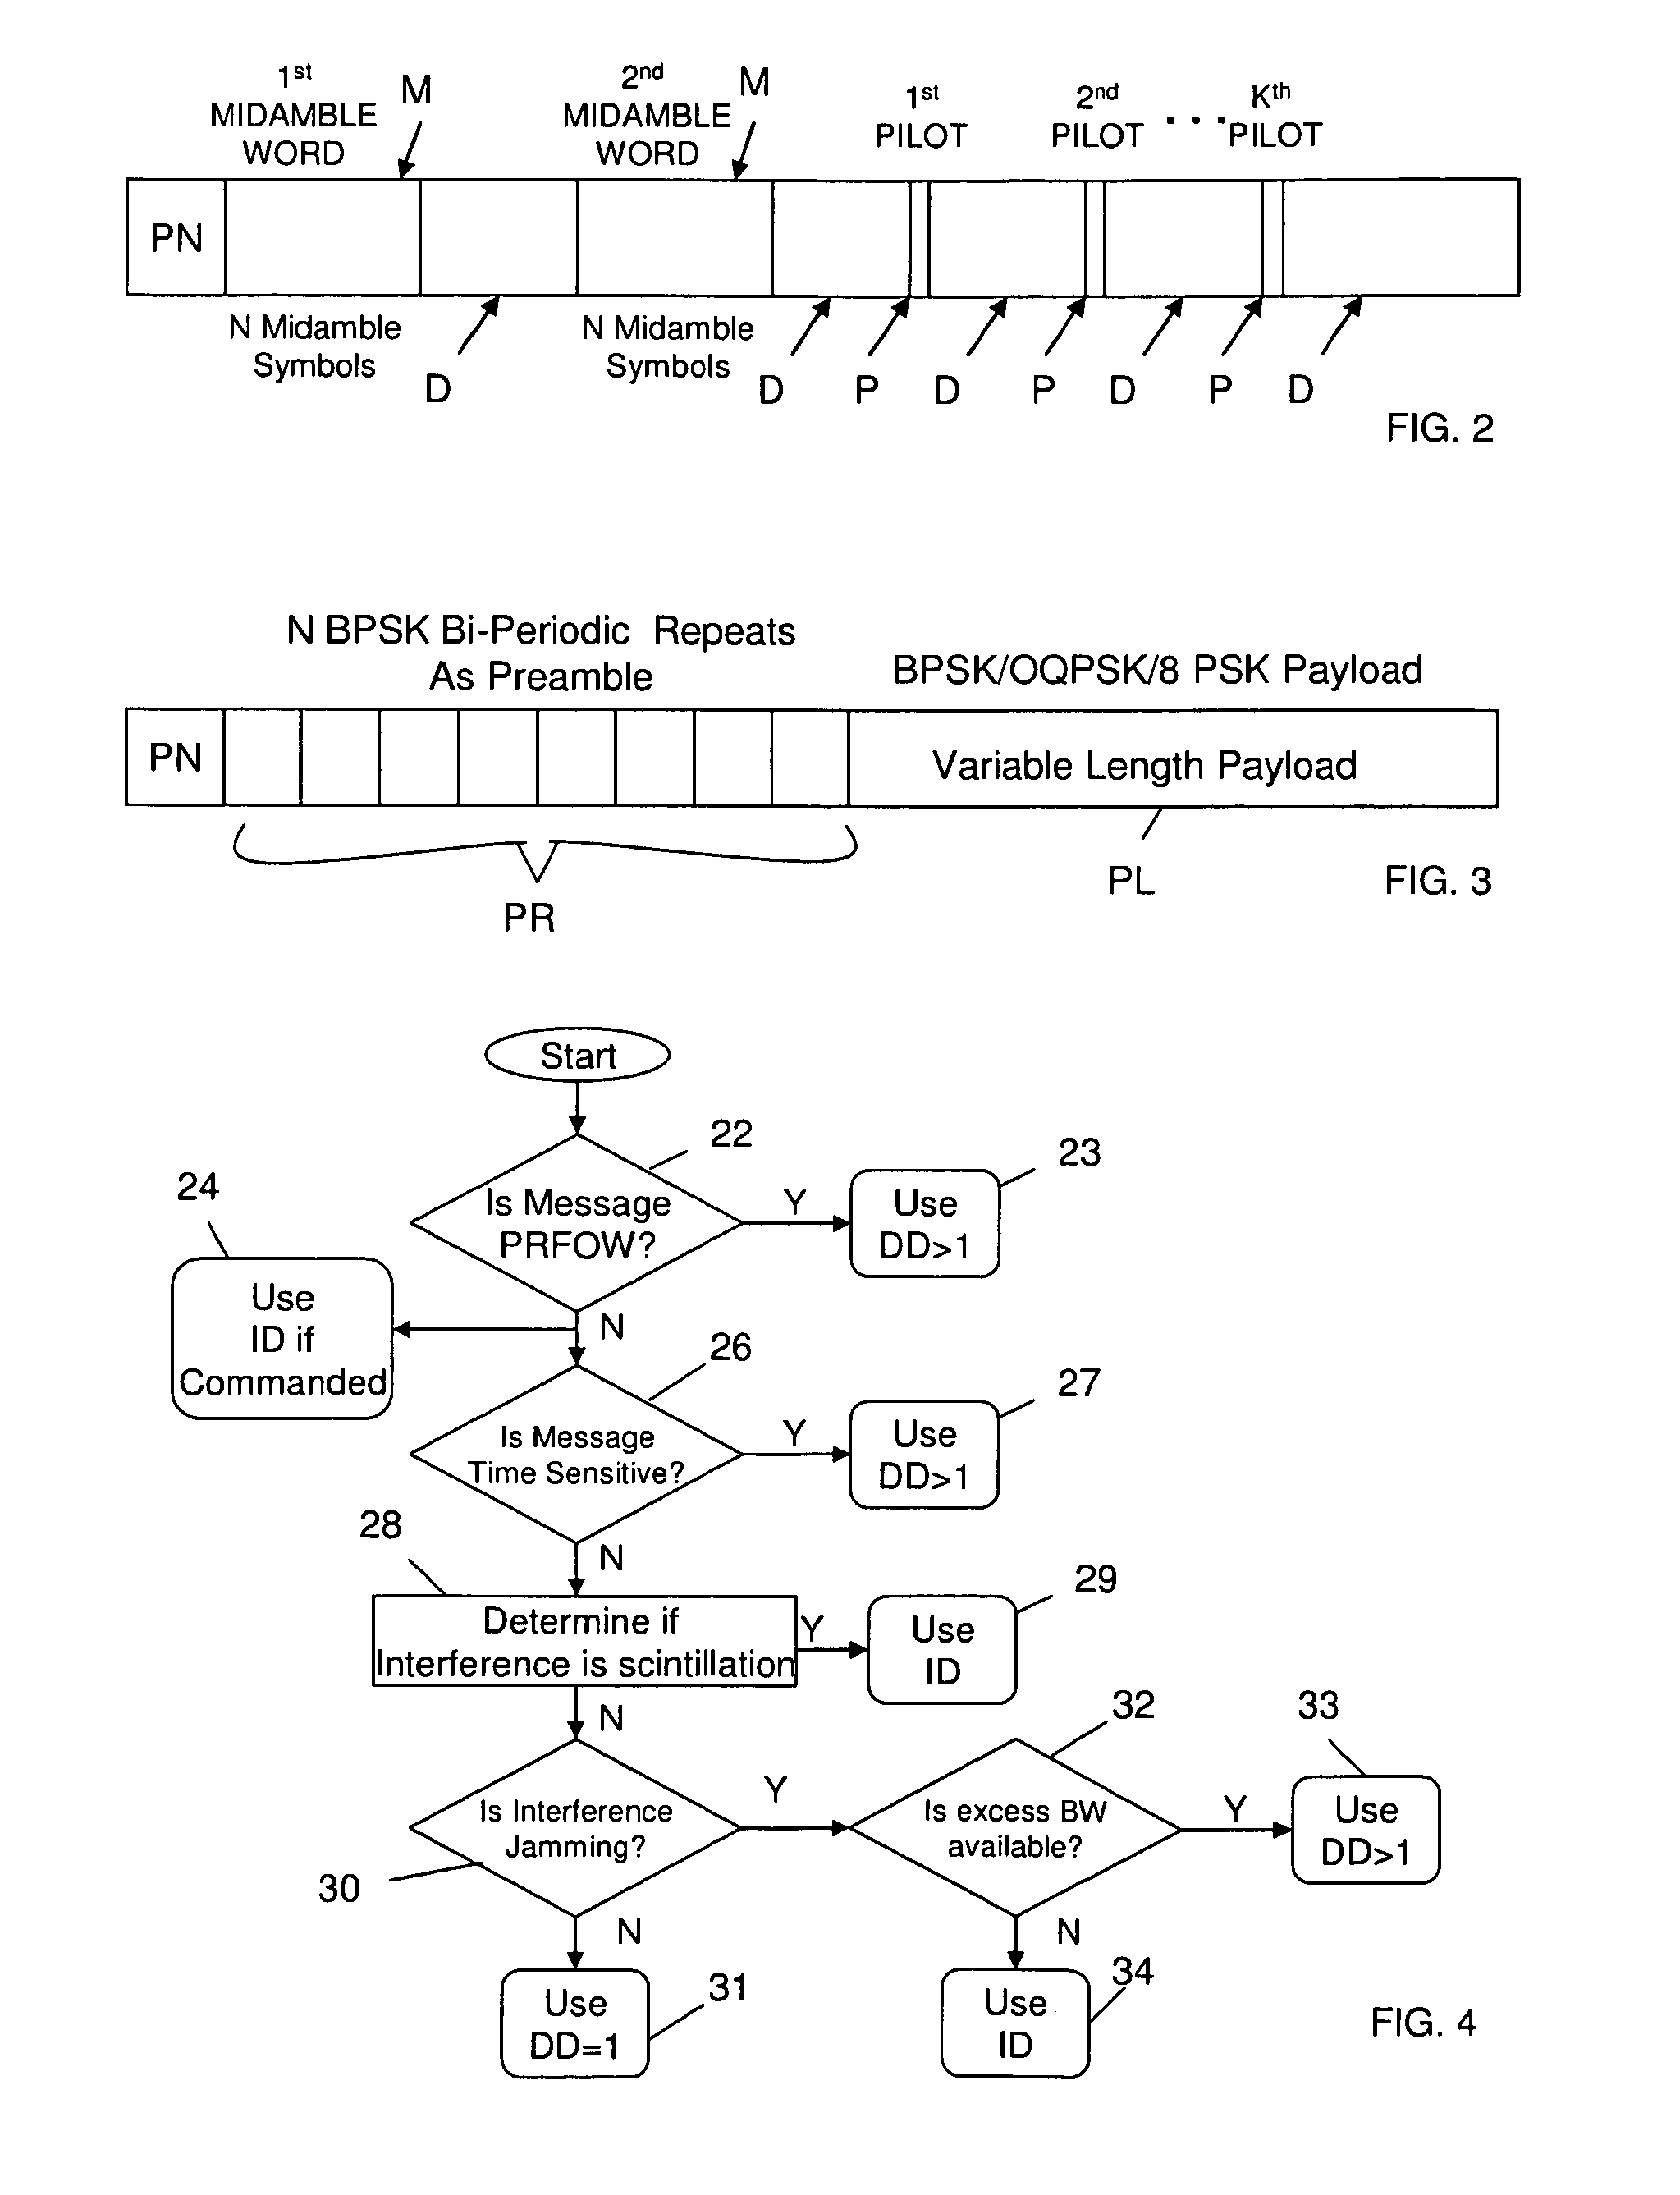 Preserving the content of a communication signal corrupted by interference during transmission